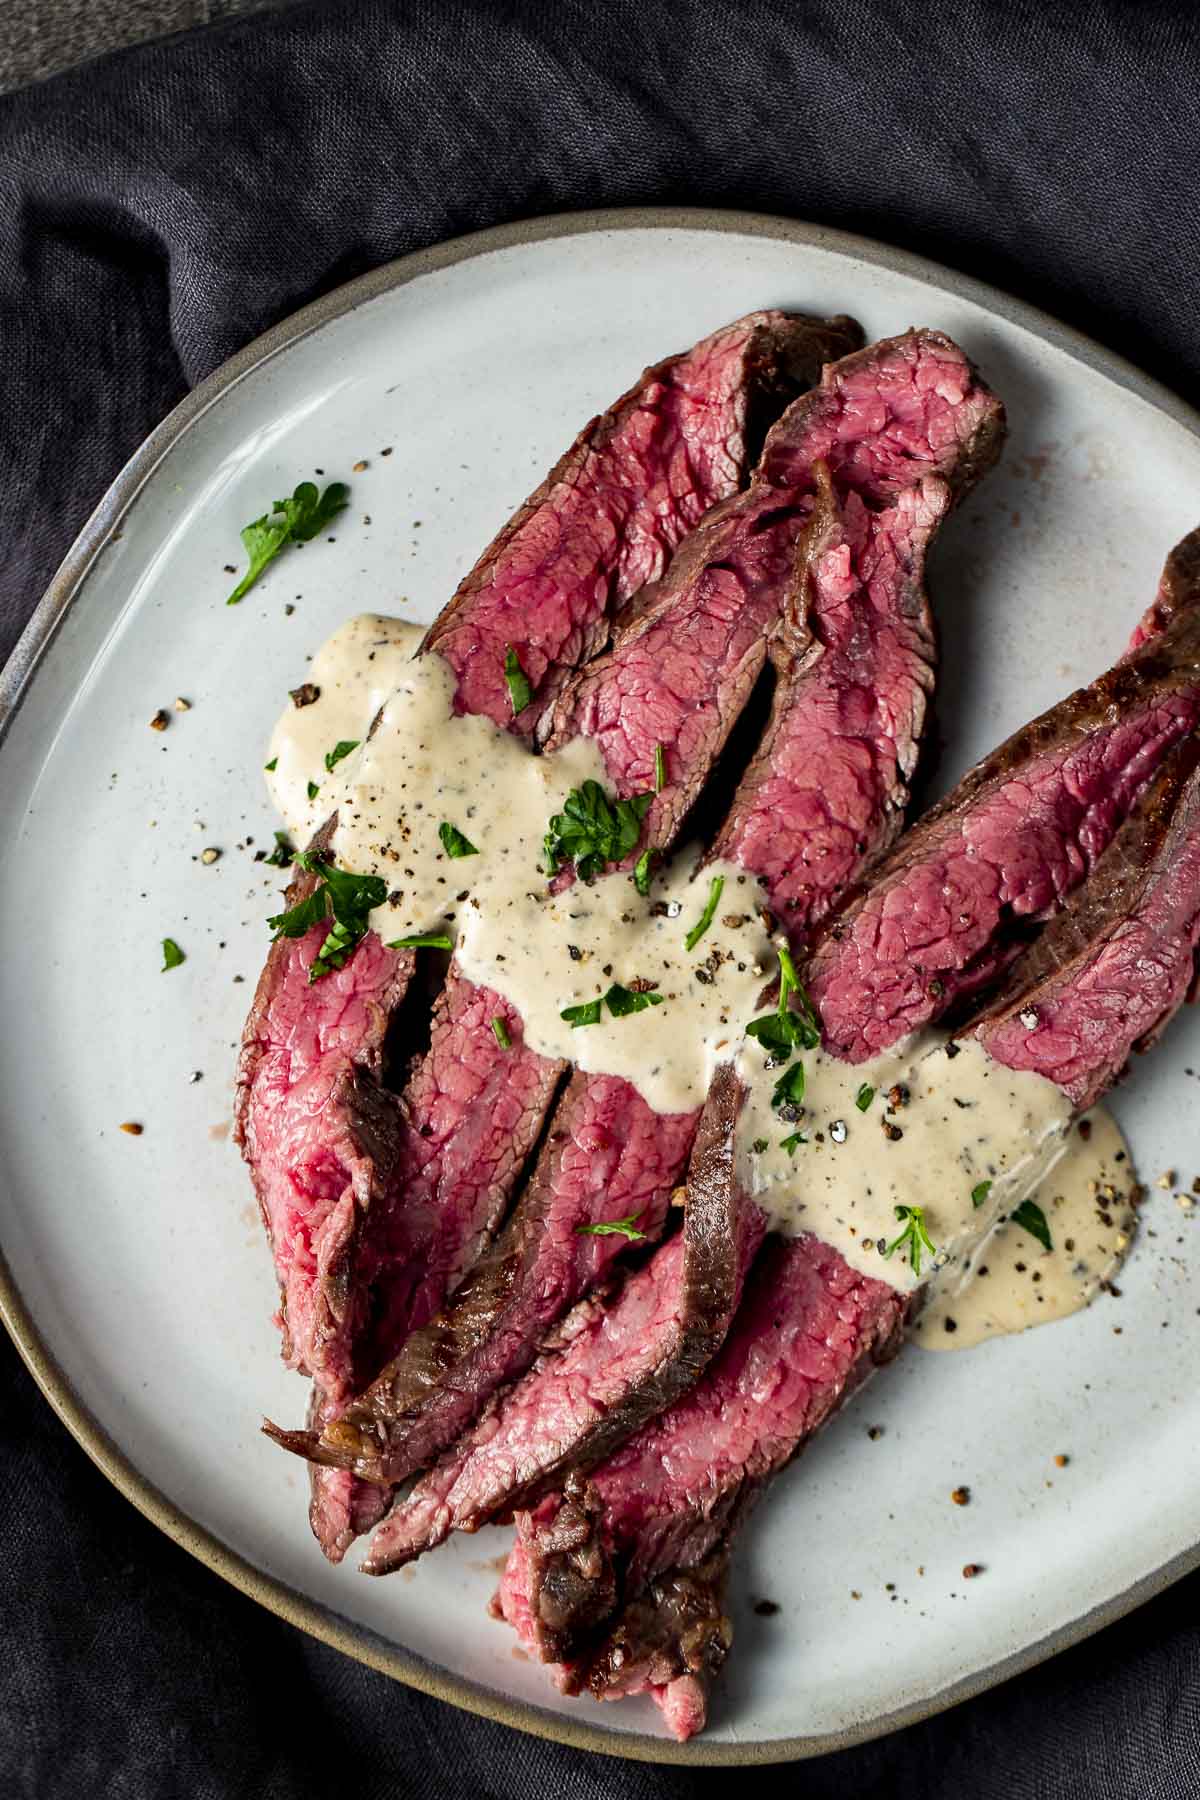 Sous Vide Flank Steak With Creamy Peppercorn Sauce - Went 8